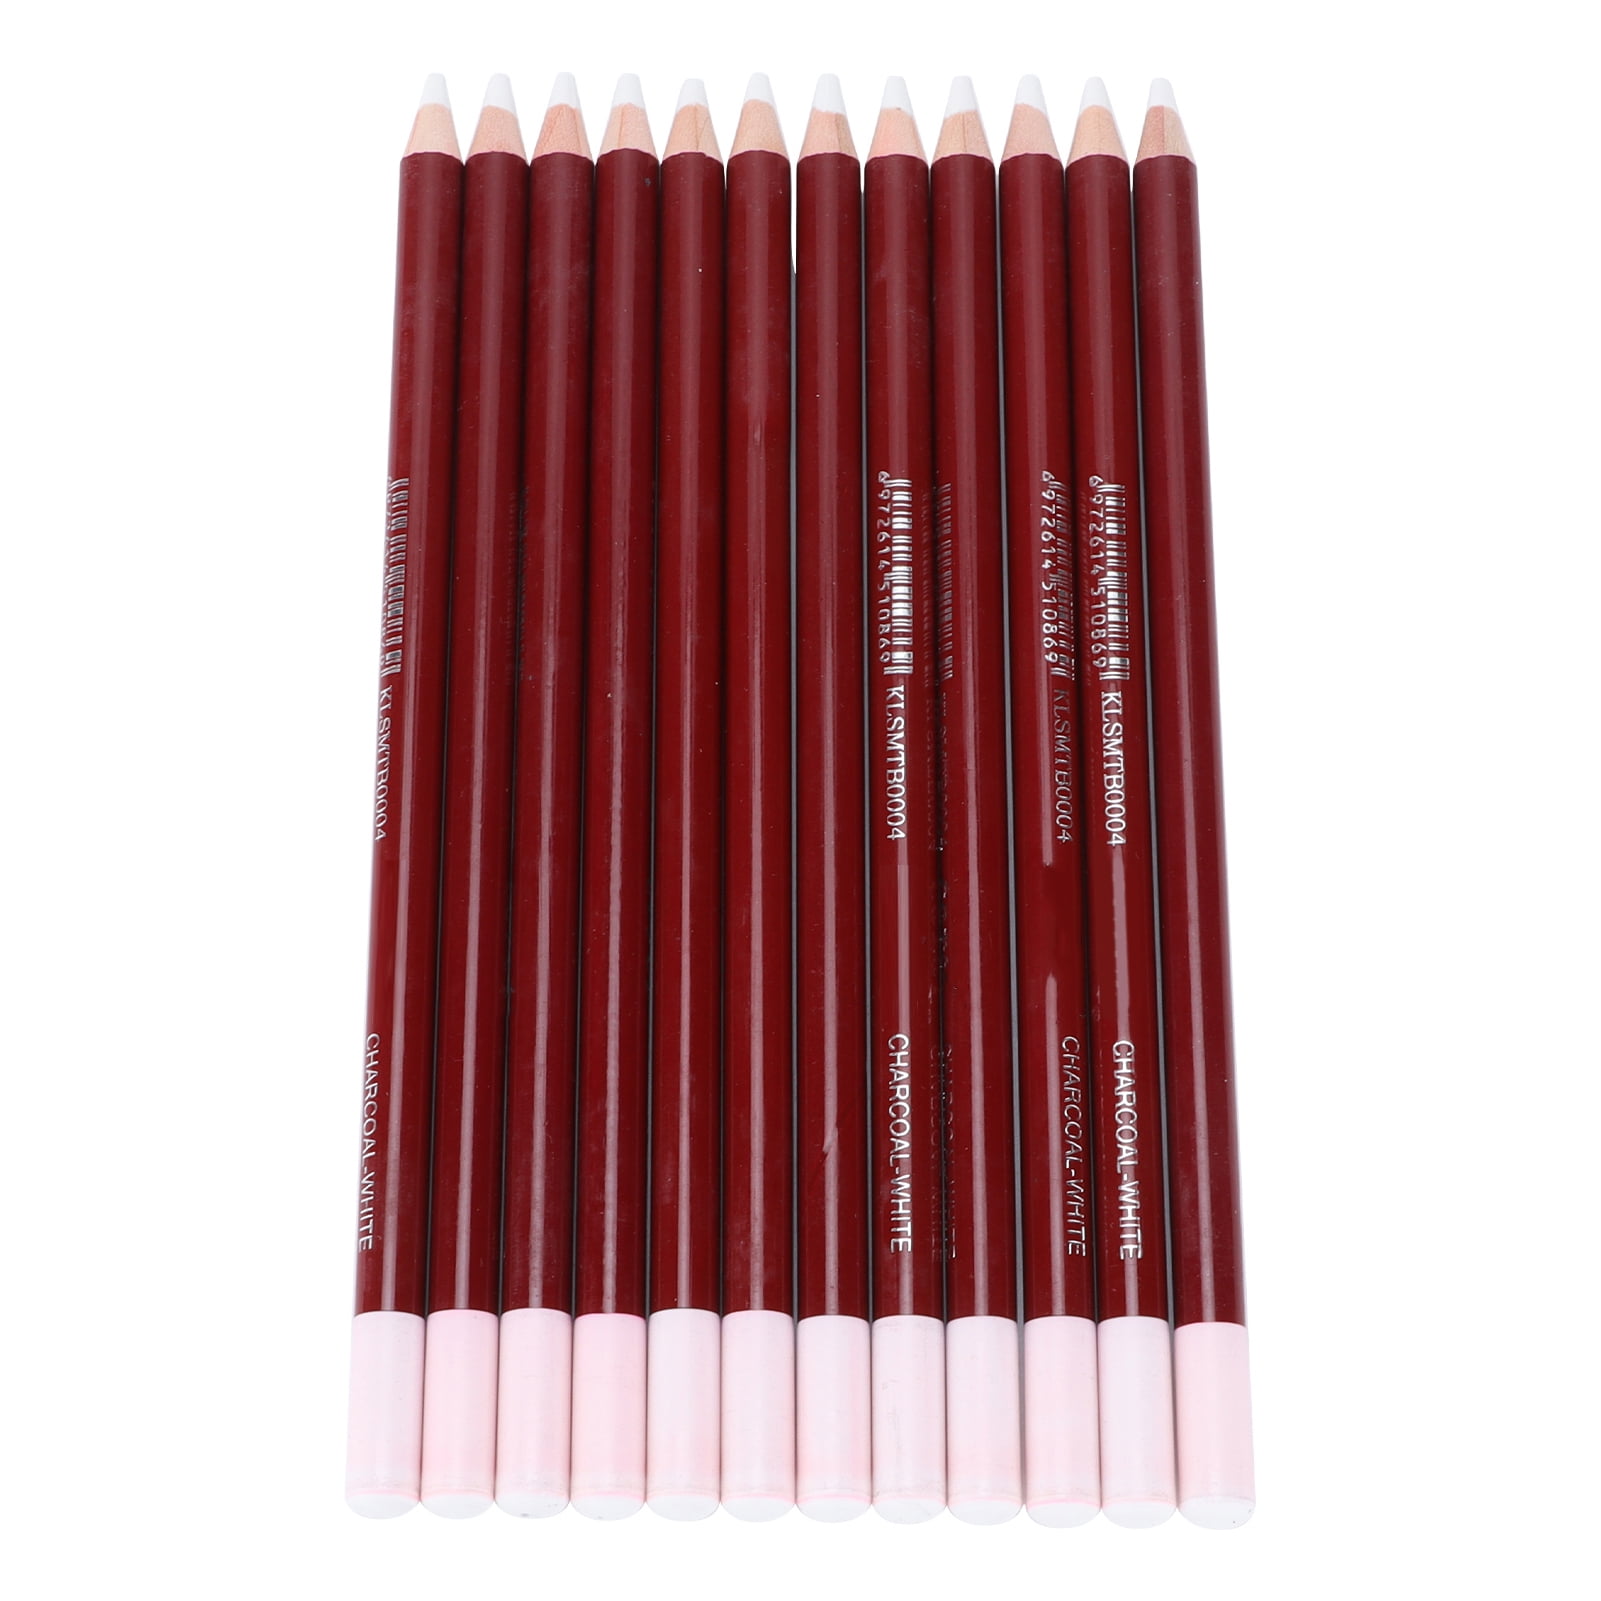 White Charcoal Pencils - Set of 12